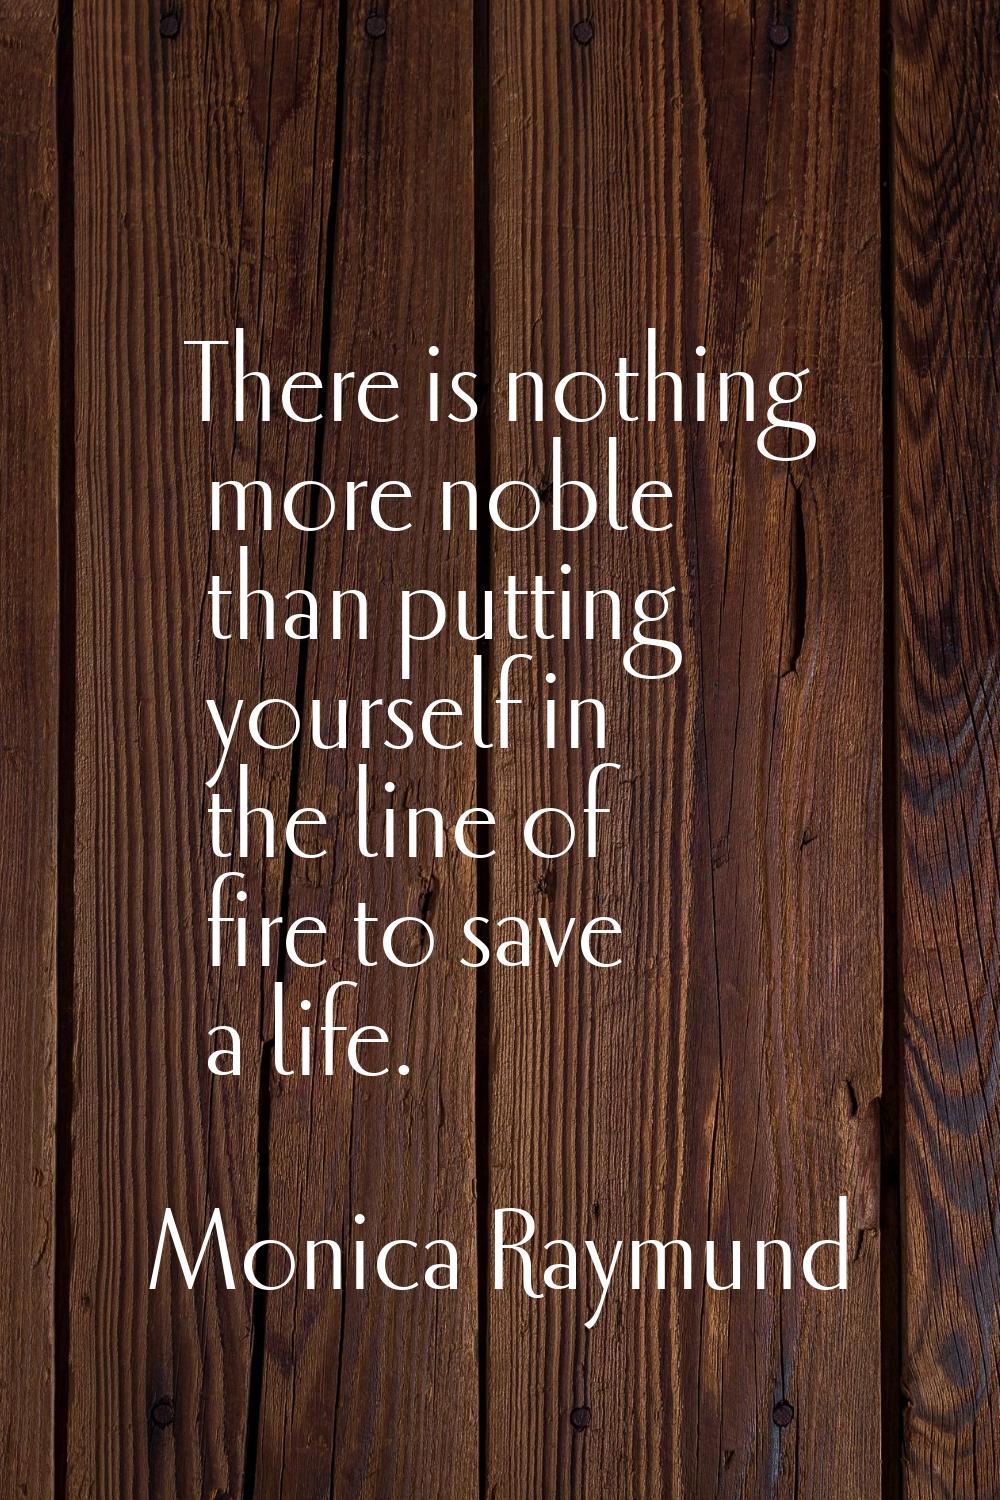 There is nothing more noble than putting yourself in the line of fire to save a life.